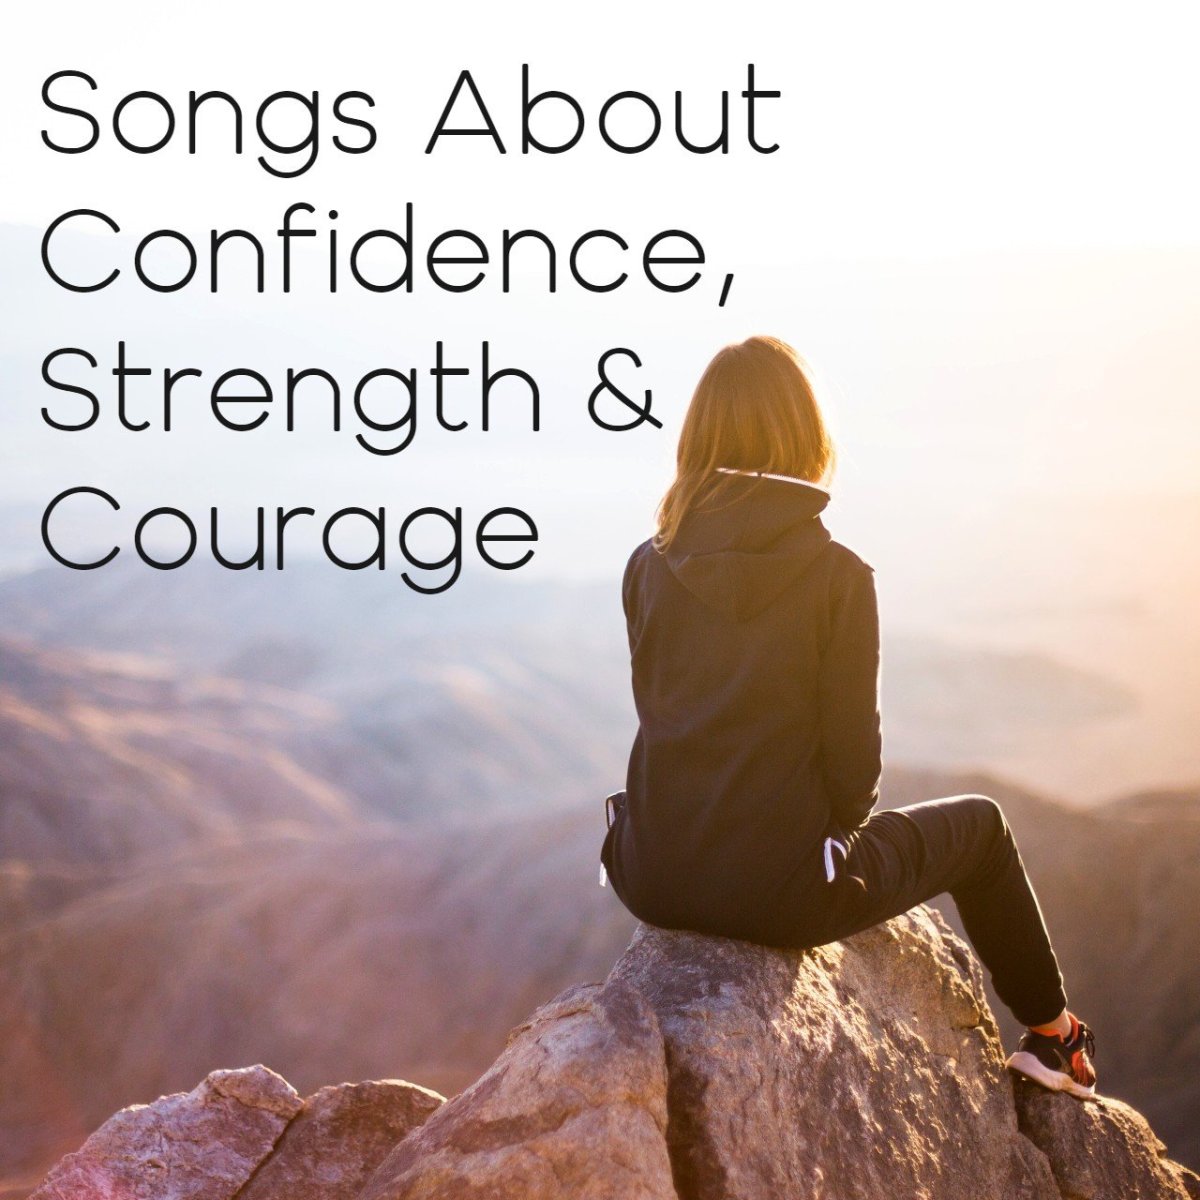 You're strong, invincible, and simply unstoppable in pursuing your dreams. Make a playlist of pop, rock, country, and R&B songs about confidence, strength, and courage.